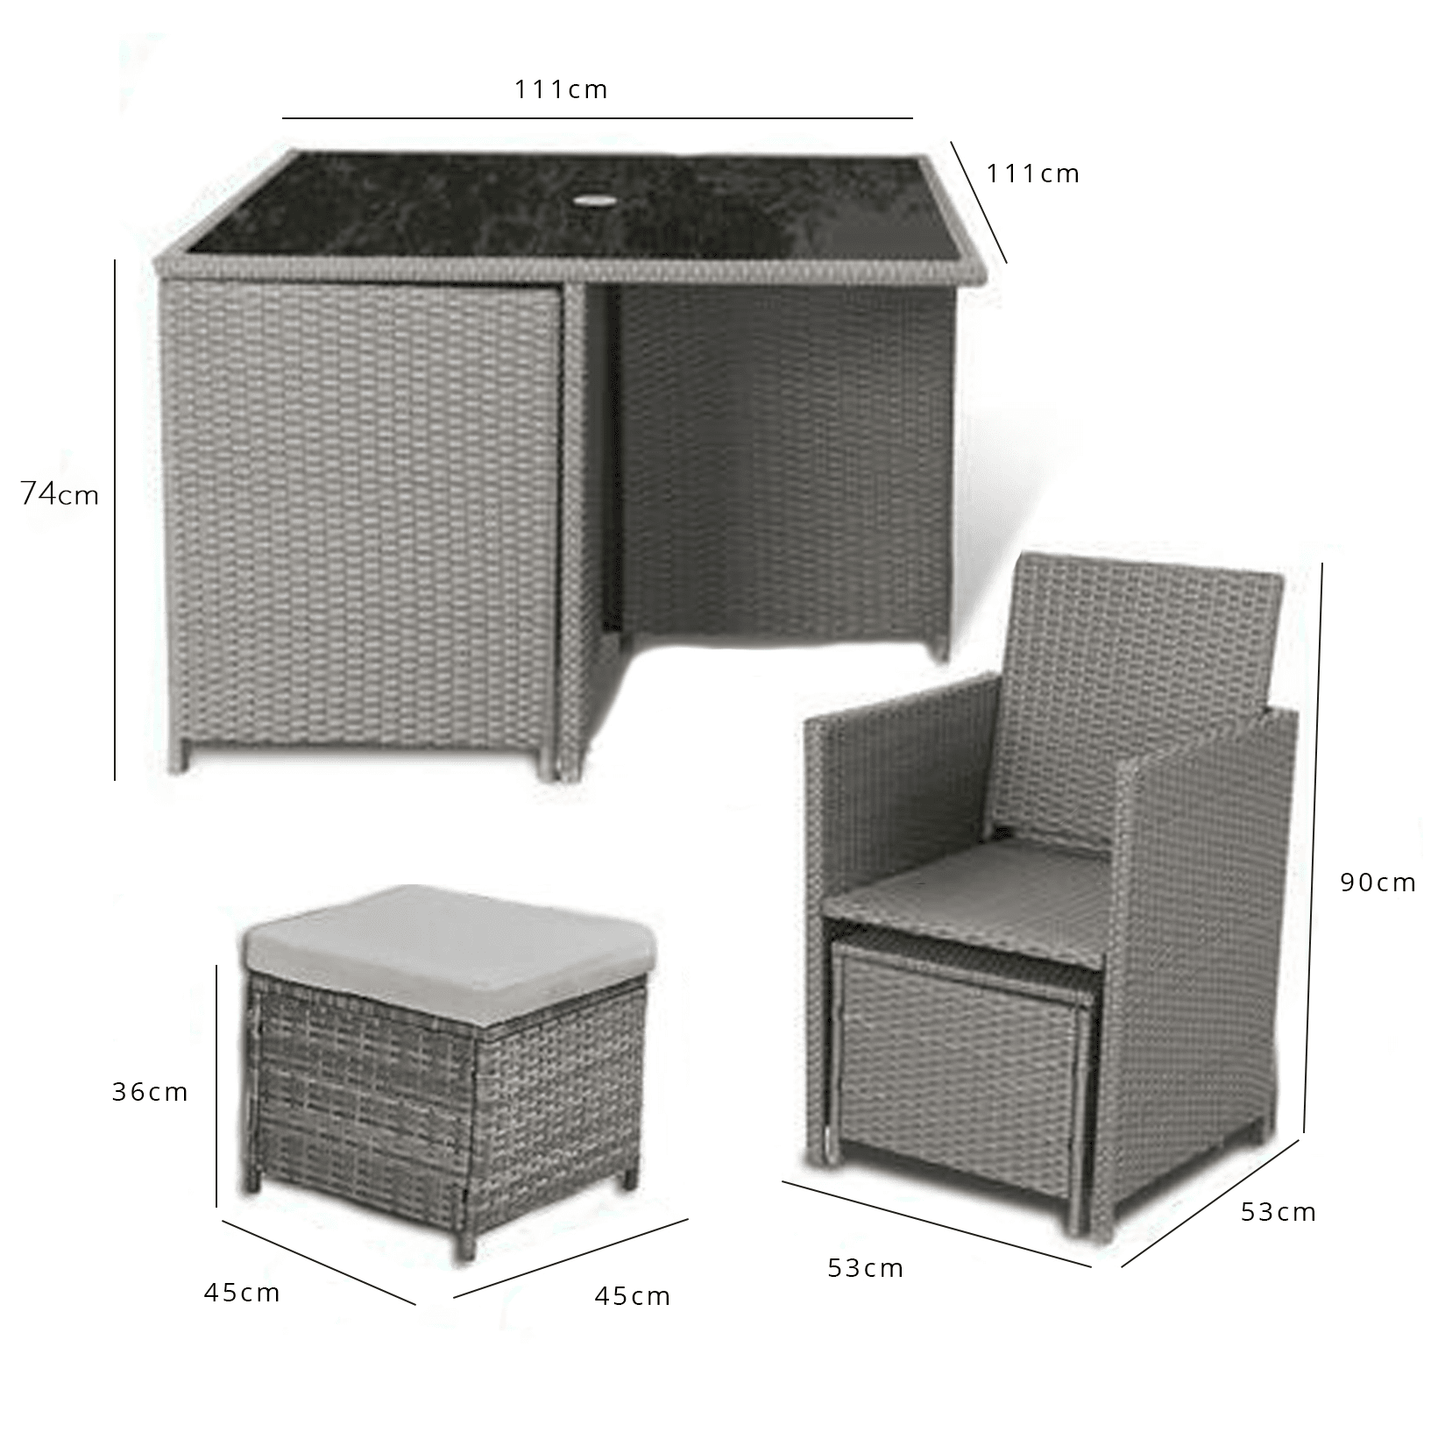 8 Seater Rattan Cube Outdoor Dining Set with Parasol - Grey Weave - Laura James